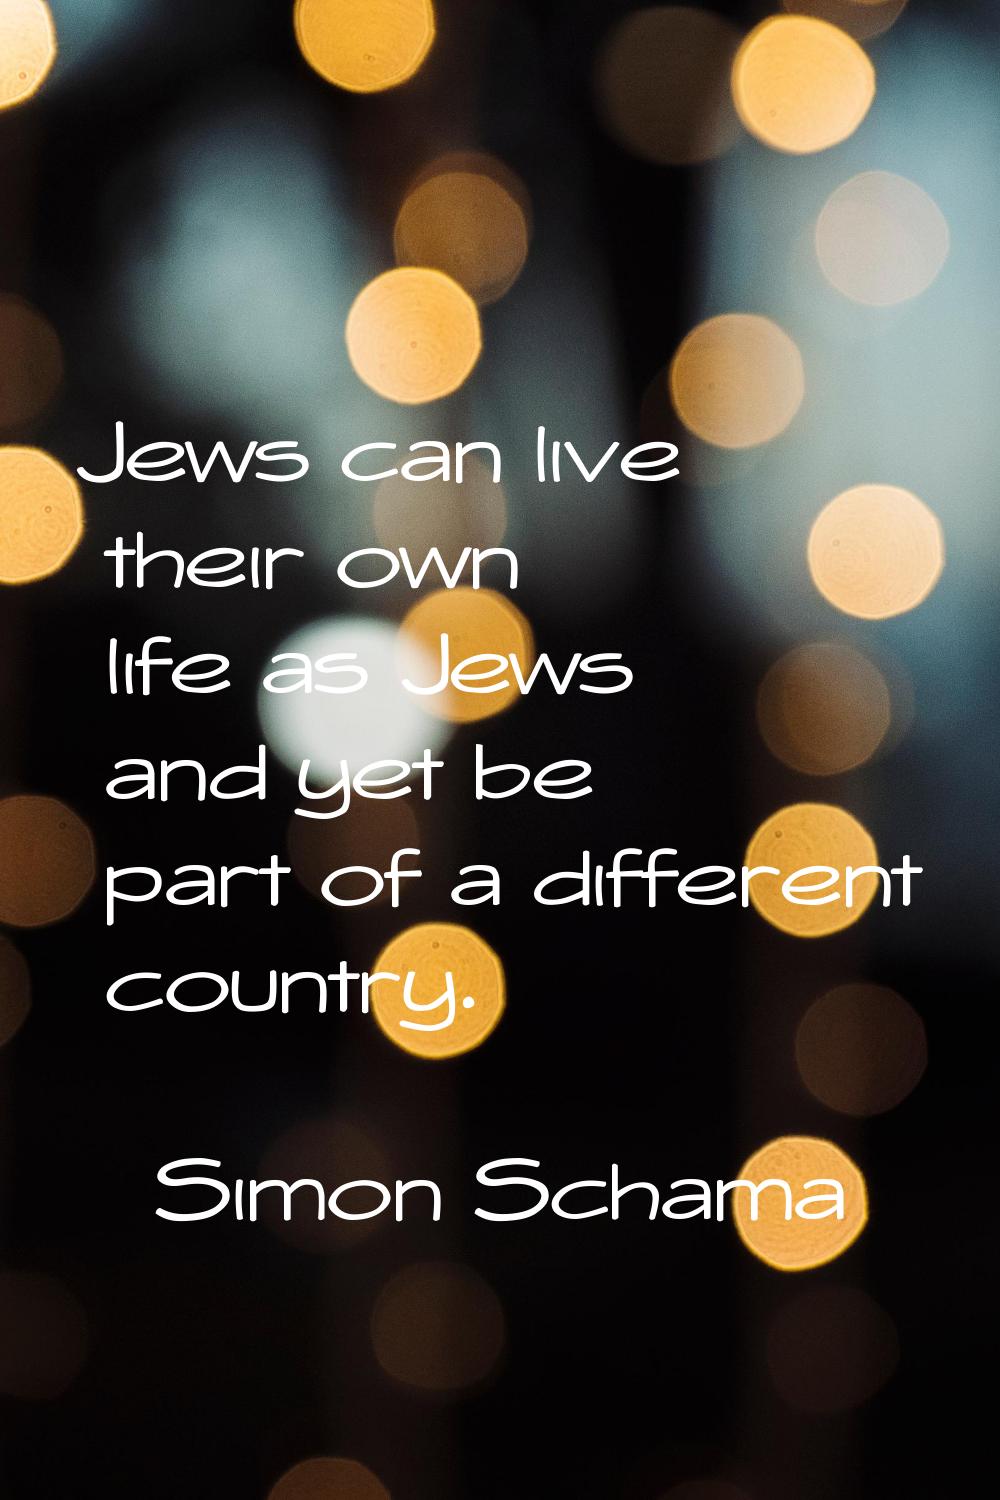 Jews can live their own life as Jews and yet be part of a different country.